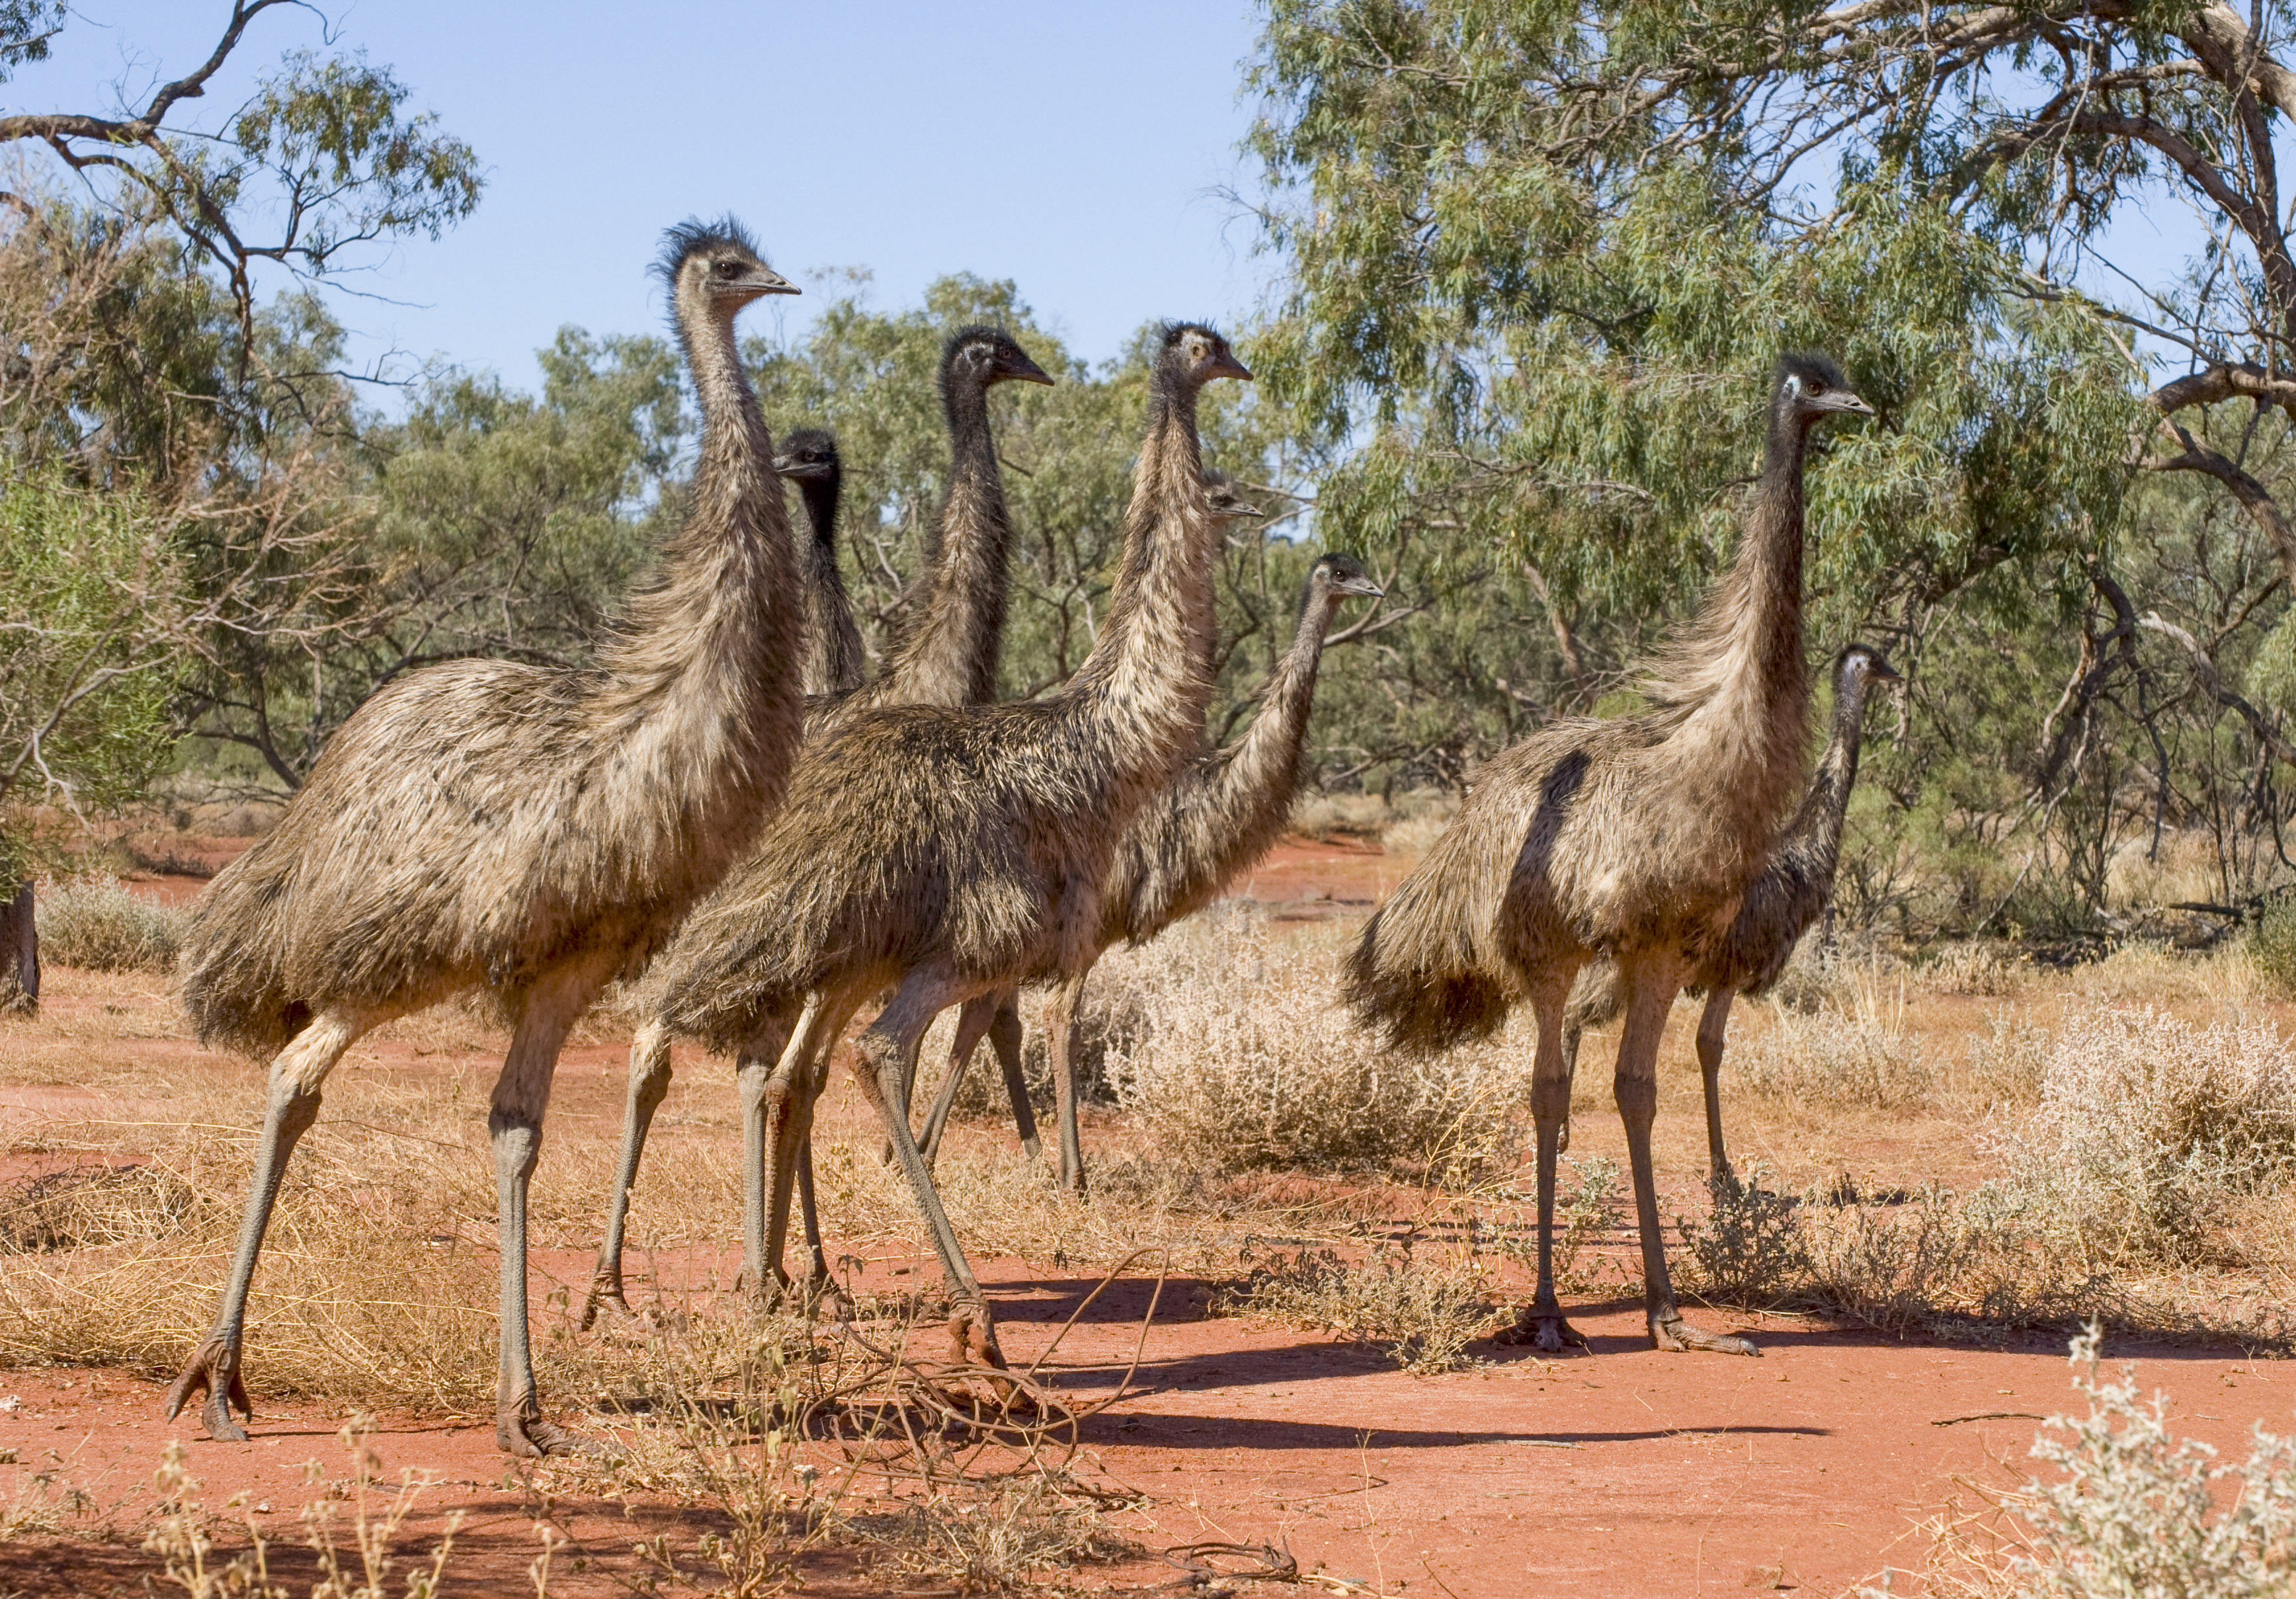 Group of emus standing together in an Australian outback setting